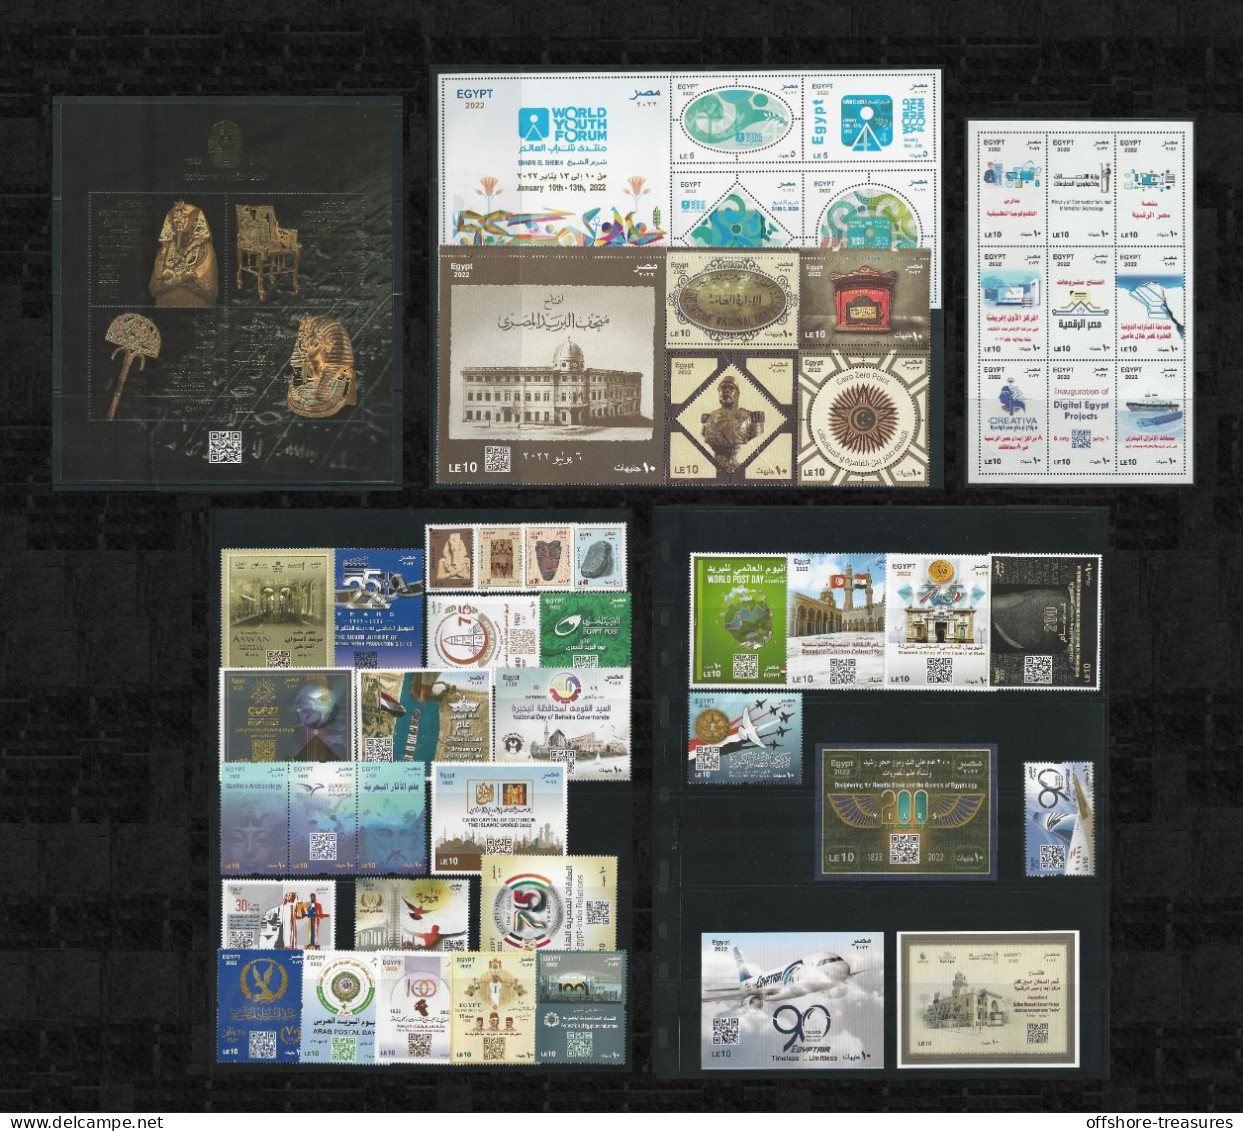 Egypt EGYPTE 2022 ONE YEAR Full Set Stamps 51 Pieces, ALL Commemorative Stamp & Definitive & Souvenir Sheet Issued - Nuevos